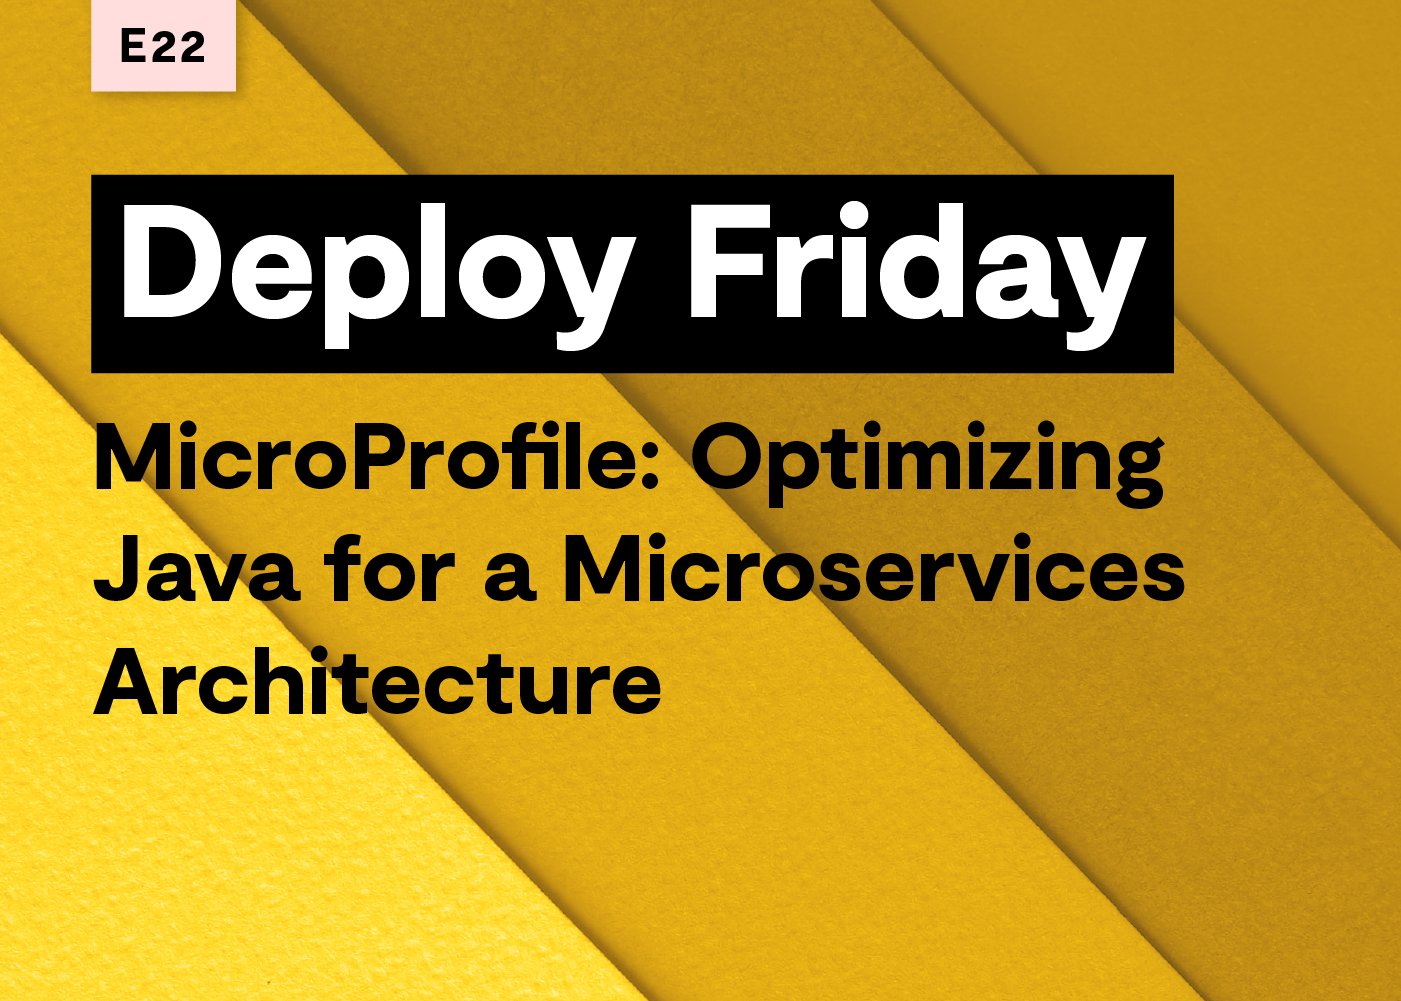 MicroProfile: Optimizing Java for a Microservices Architecture